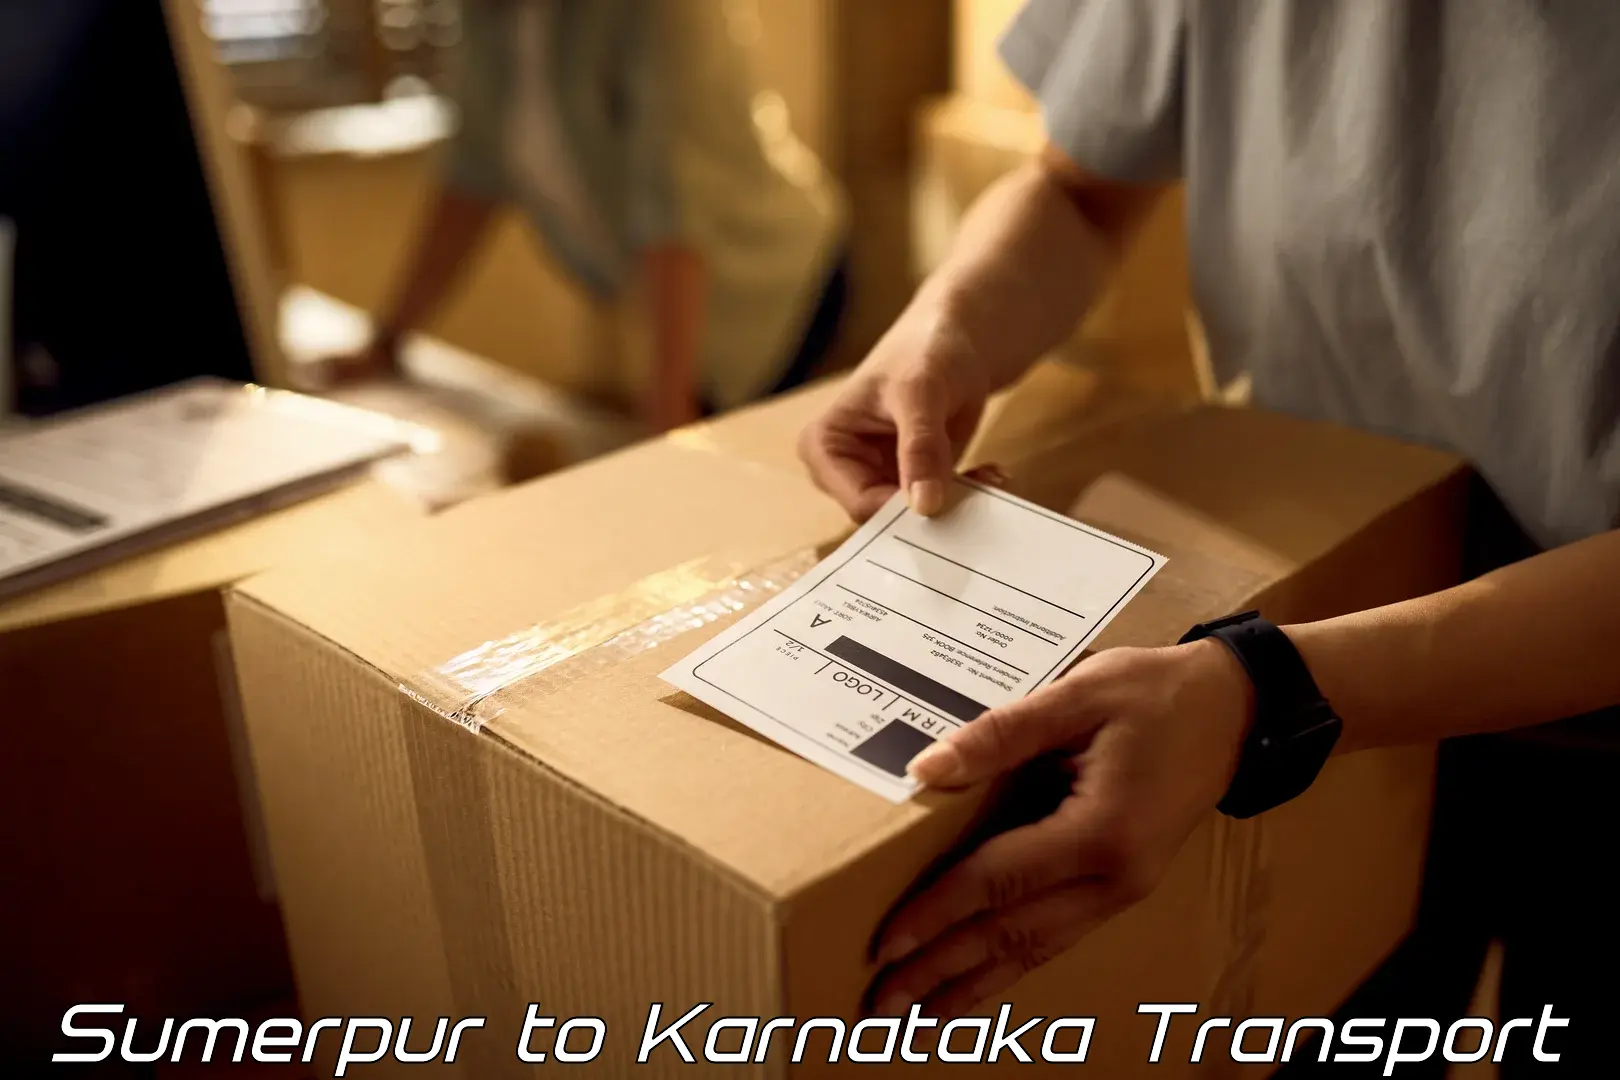 Two wheeler parcel service Sumerpur to Mangalore